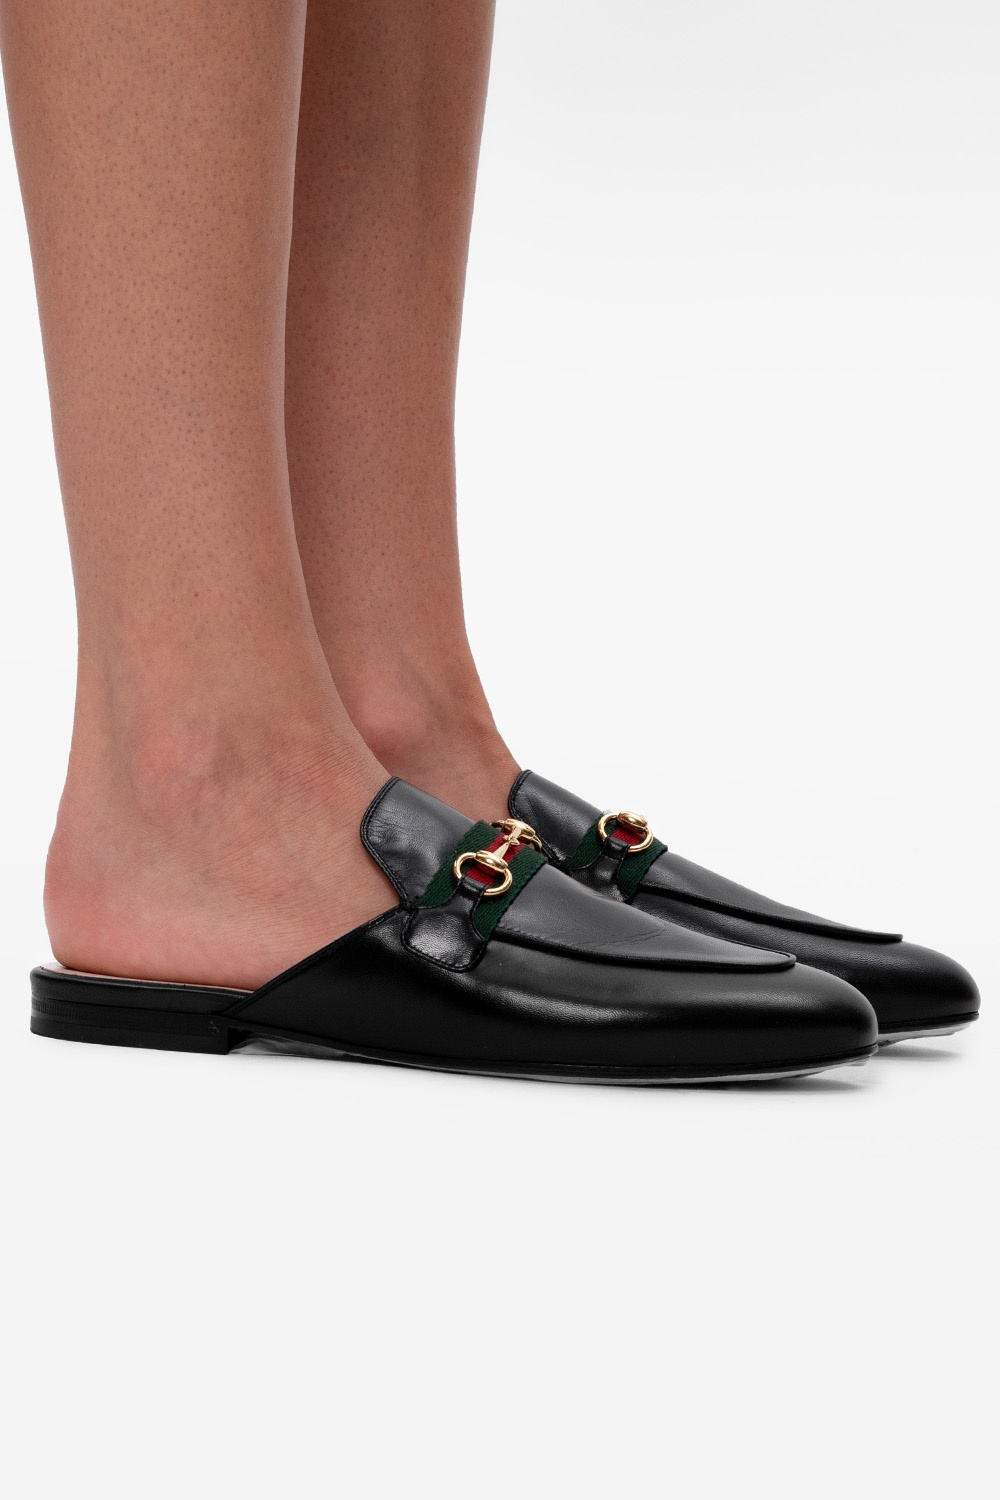 Princetown' leather slippers Gucci - Vitkac